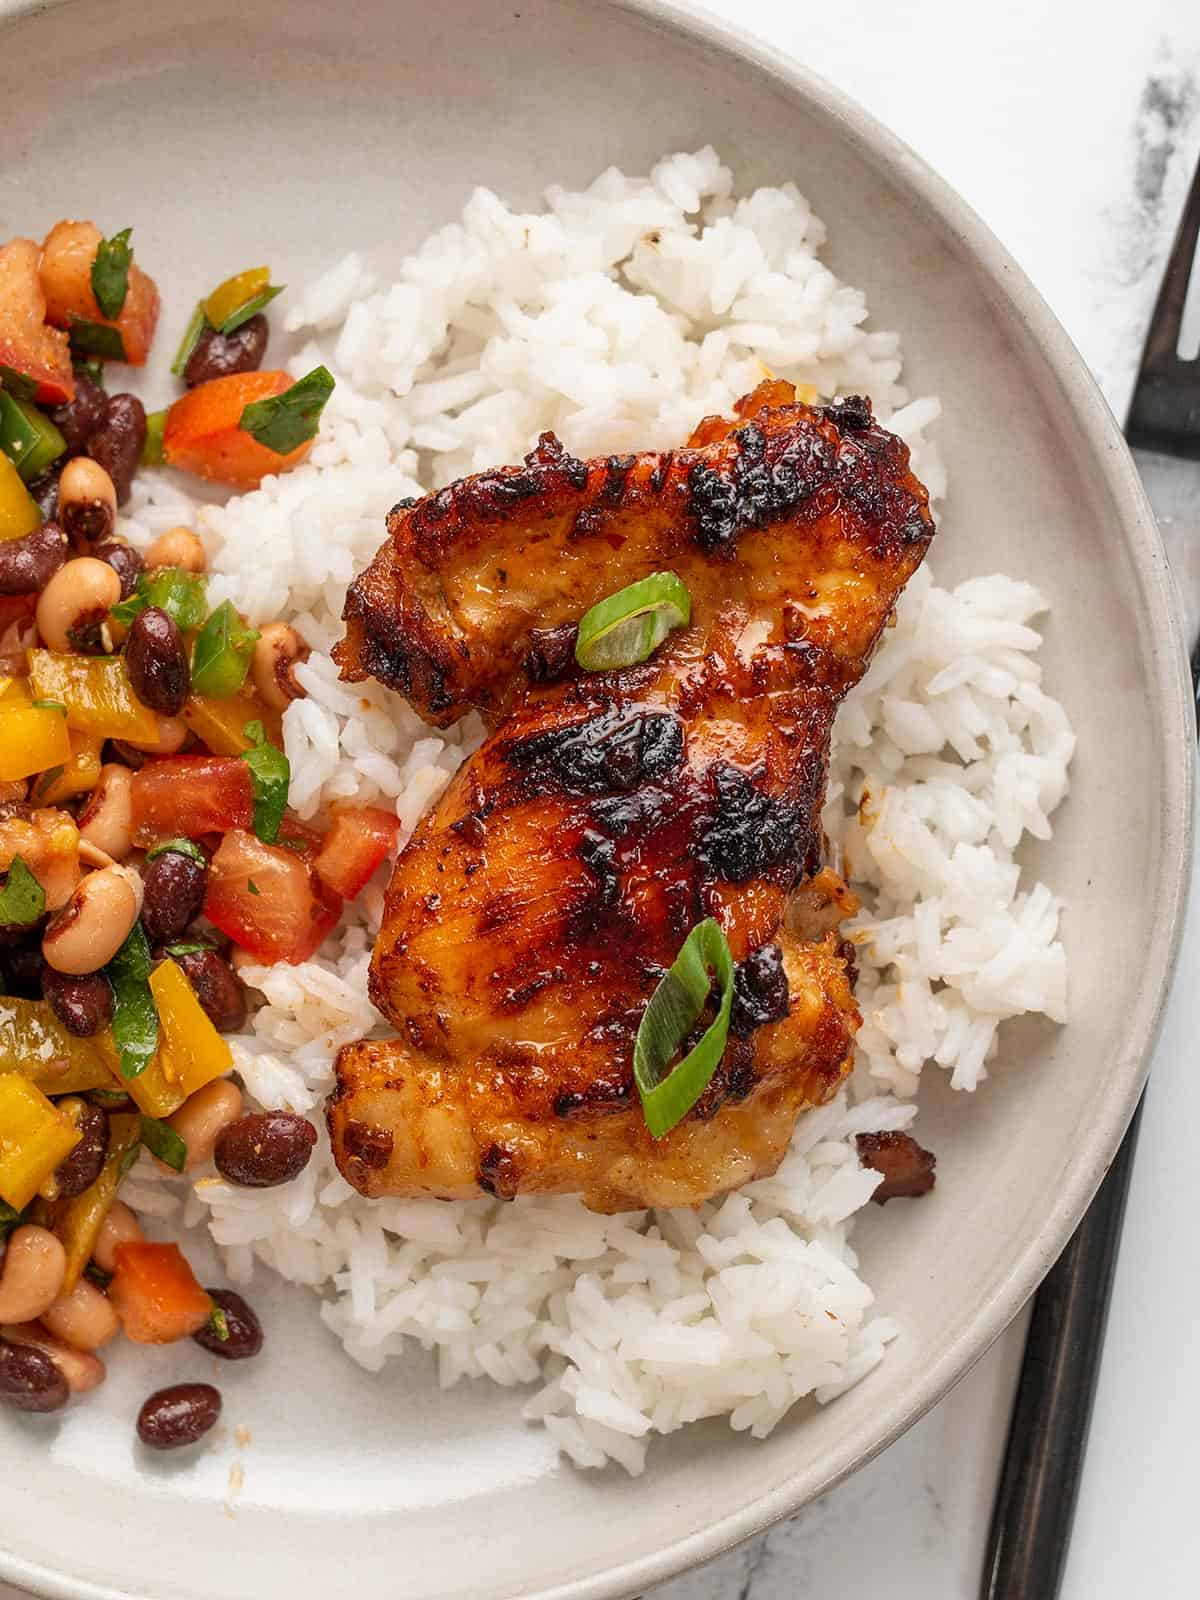 A honey chipotle chicken thigh on a bed of rice on a plate next to bean salad.